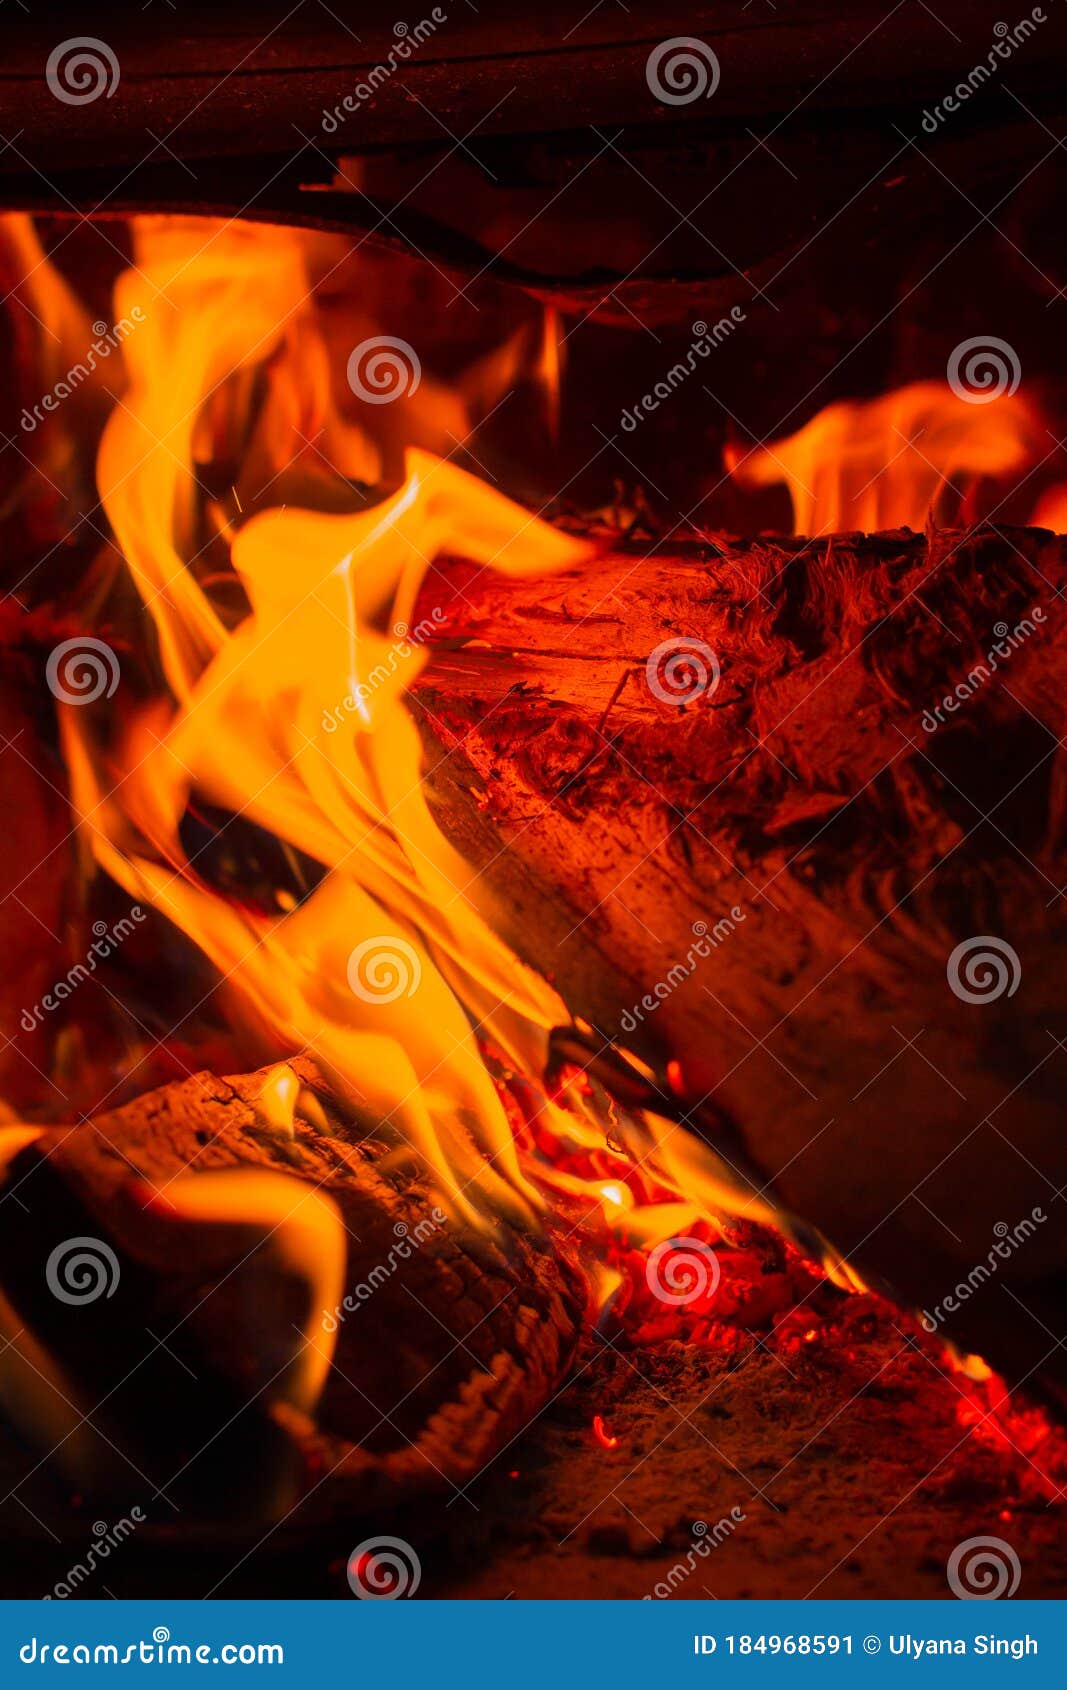 wood log burning in the chimenea. fire wood, coal and amber ash closeup. red tongues of flame and glowing amber.